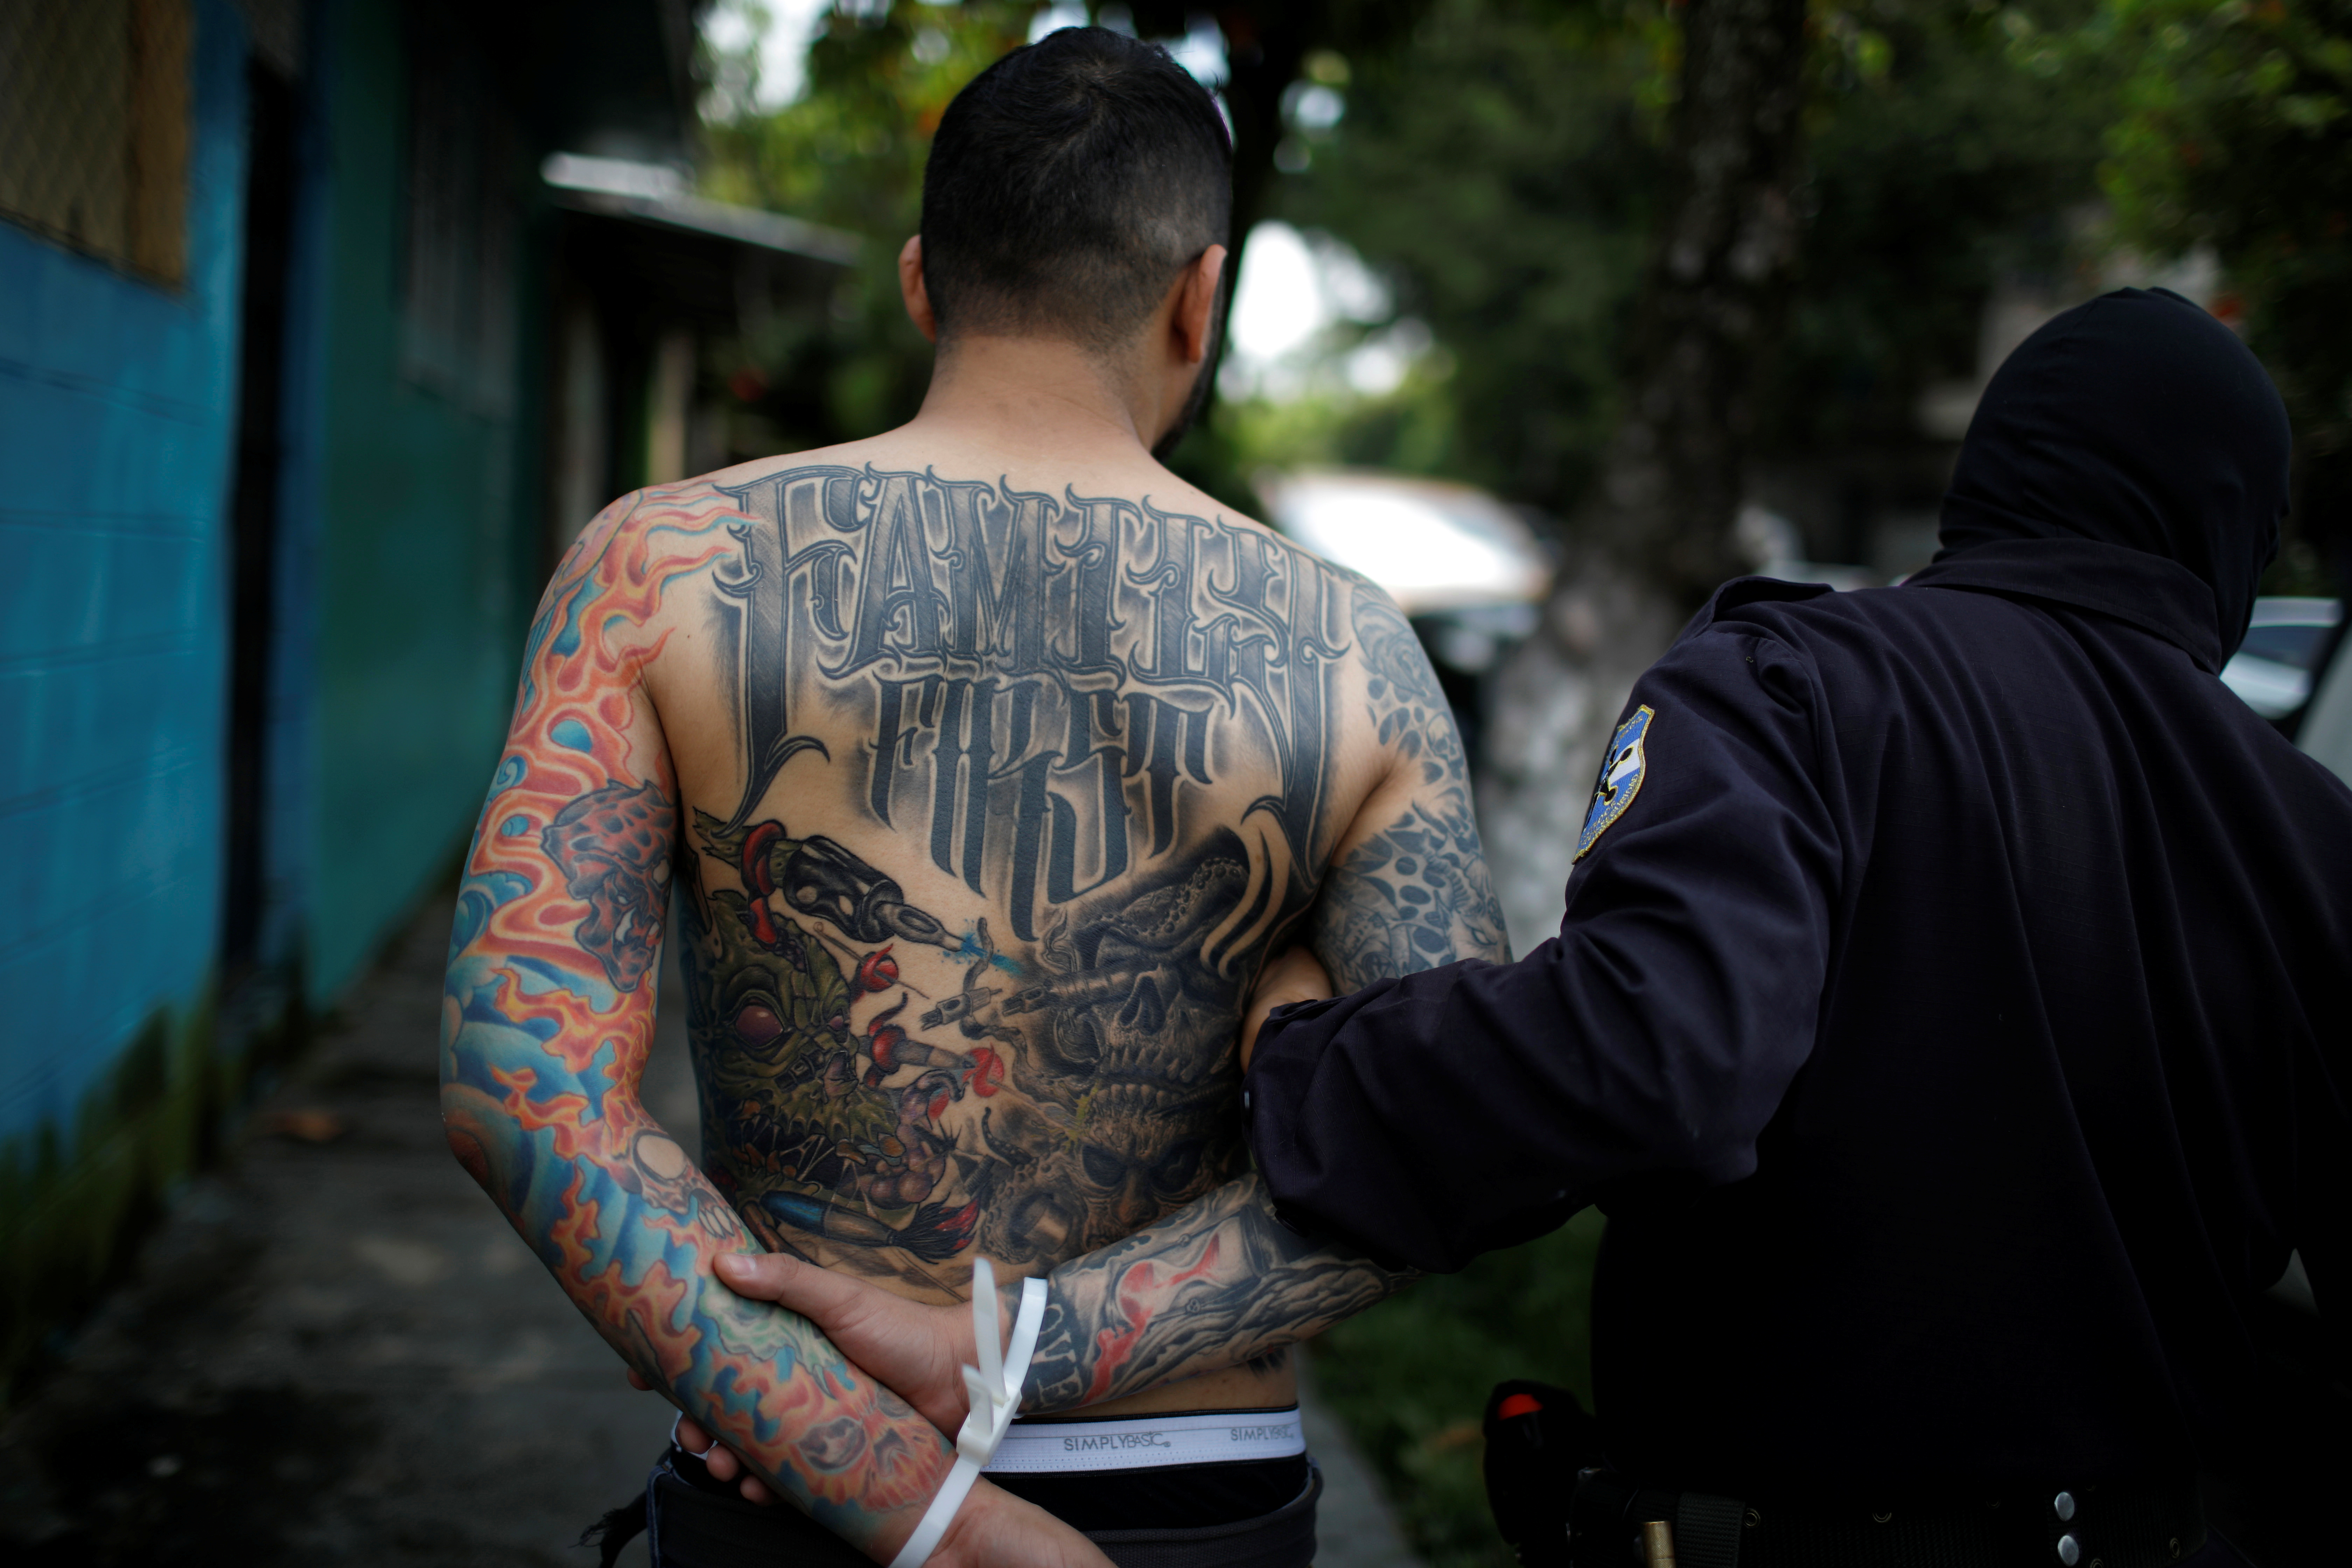 A police officer detains a man in a seized MS-13 gang usurped house during a "Casa Segura" (Safe House) operation at Jardines de San Bartolo neighborhood, in Ilopango